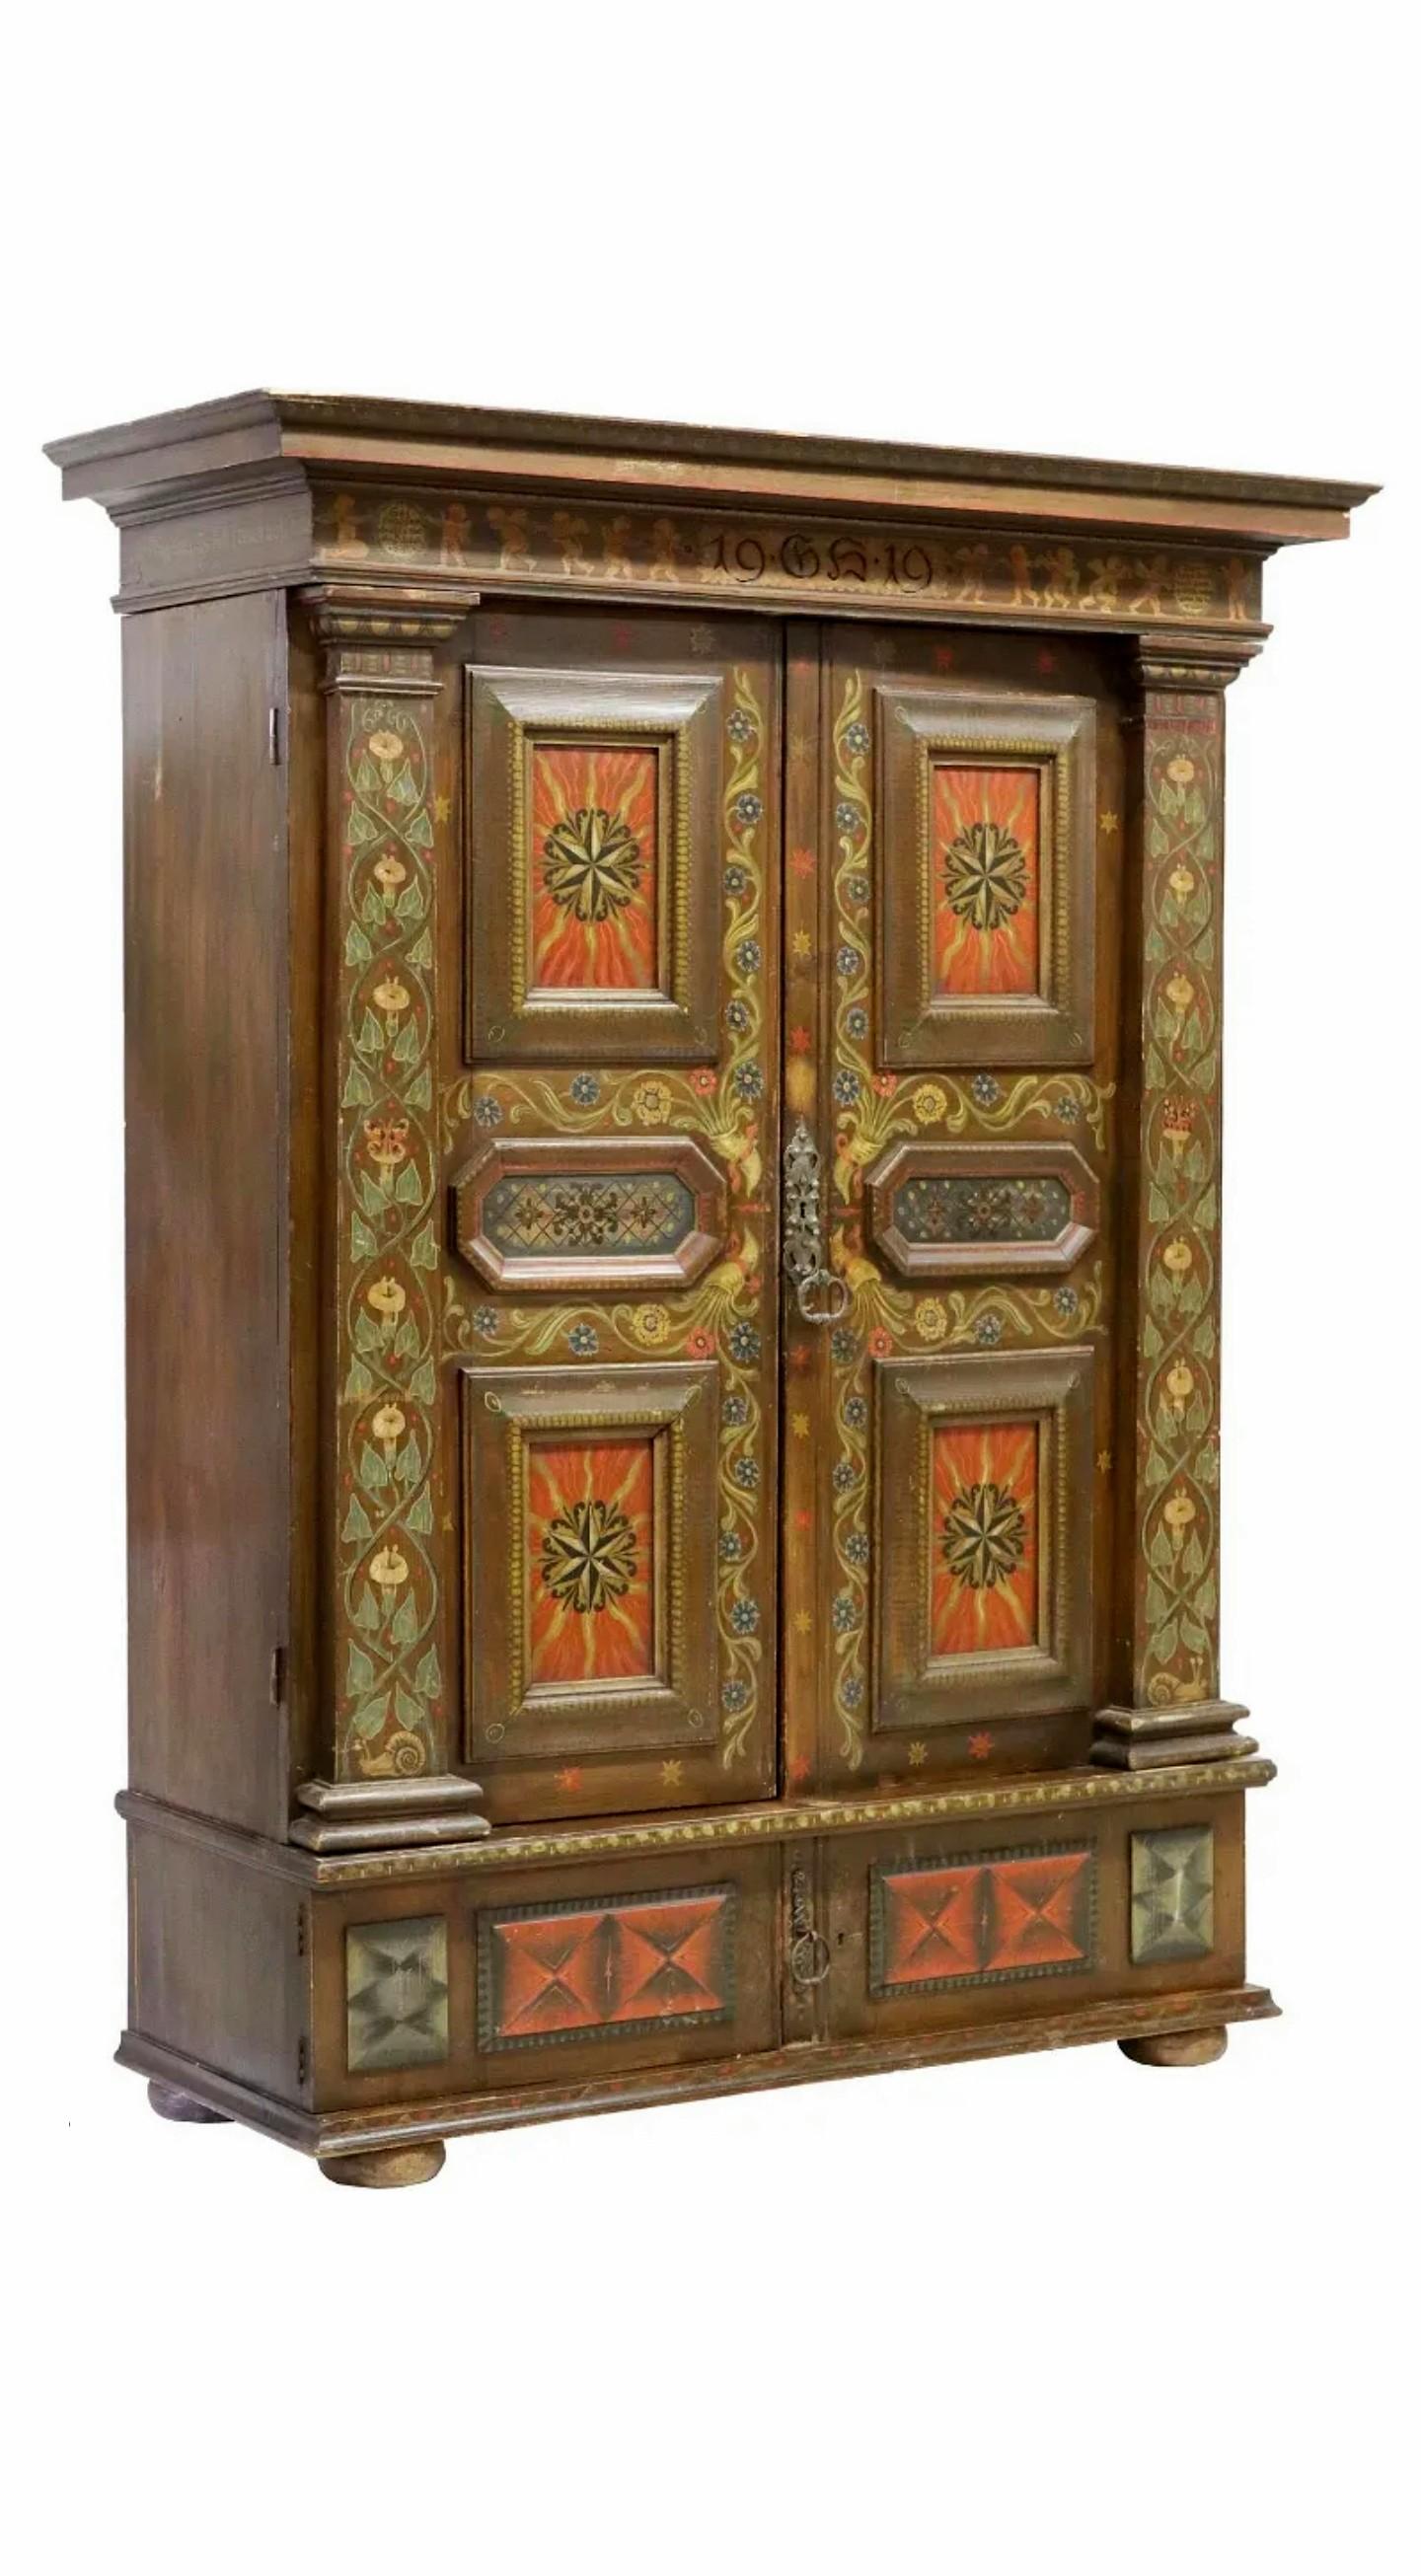 A most impressive rustic country Swiss folk paint-decorated armoire.

Hand-crafted in Switzerland in the 19th century, exquisitely hand-painted with polychrome florals throughout, having molded cornice, crest inscribed 19-GS-19, flanked by winged